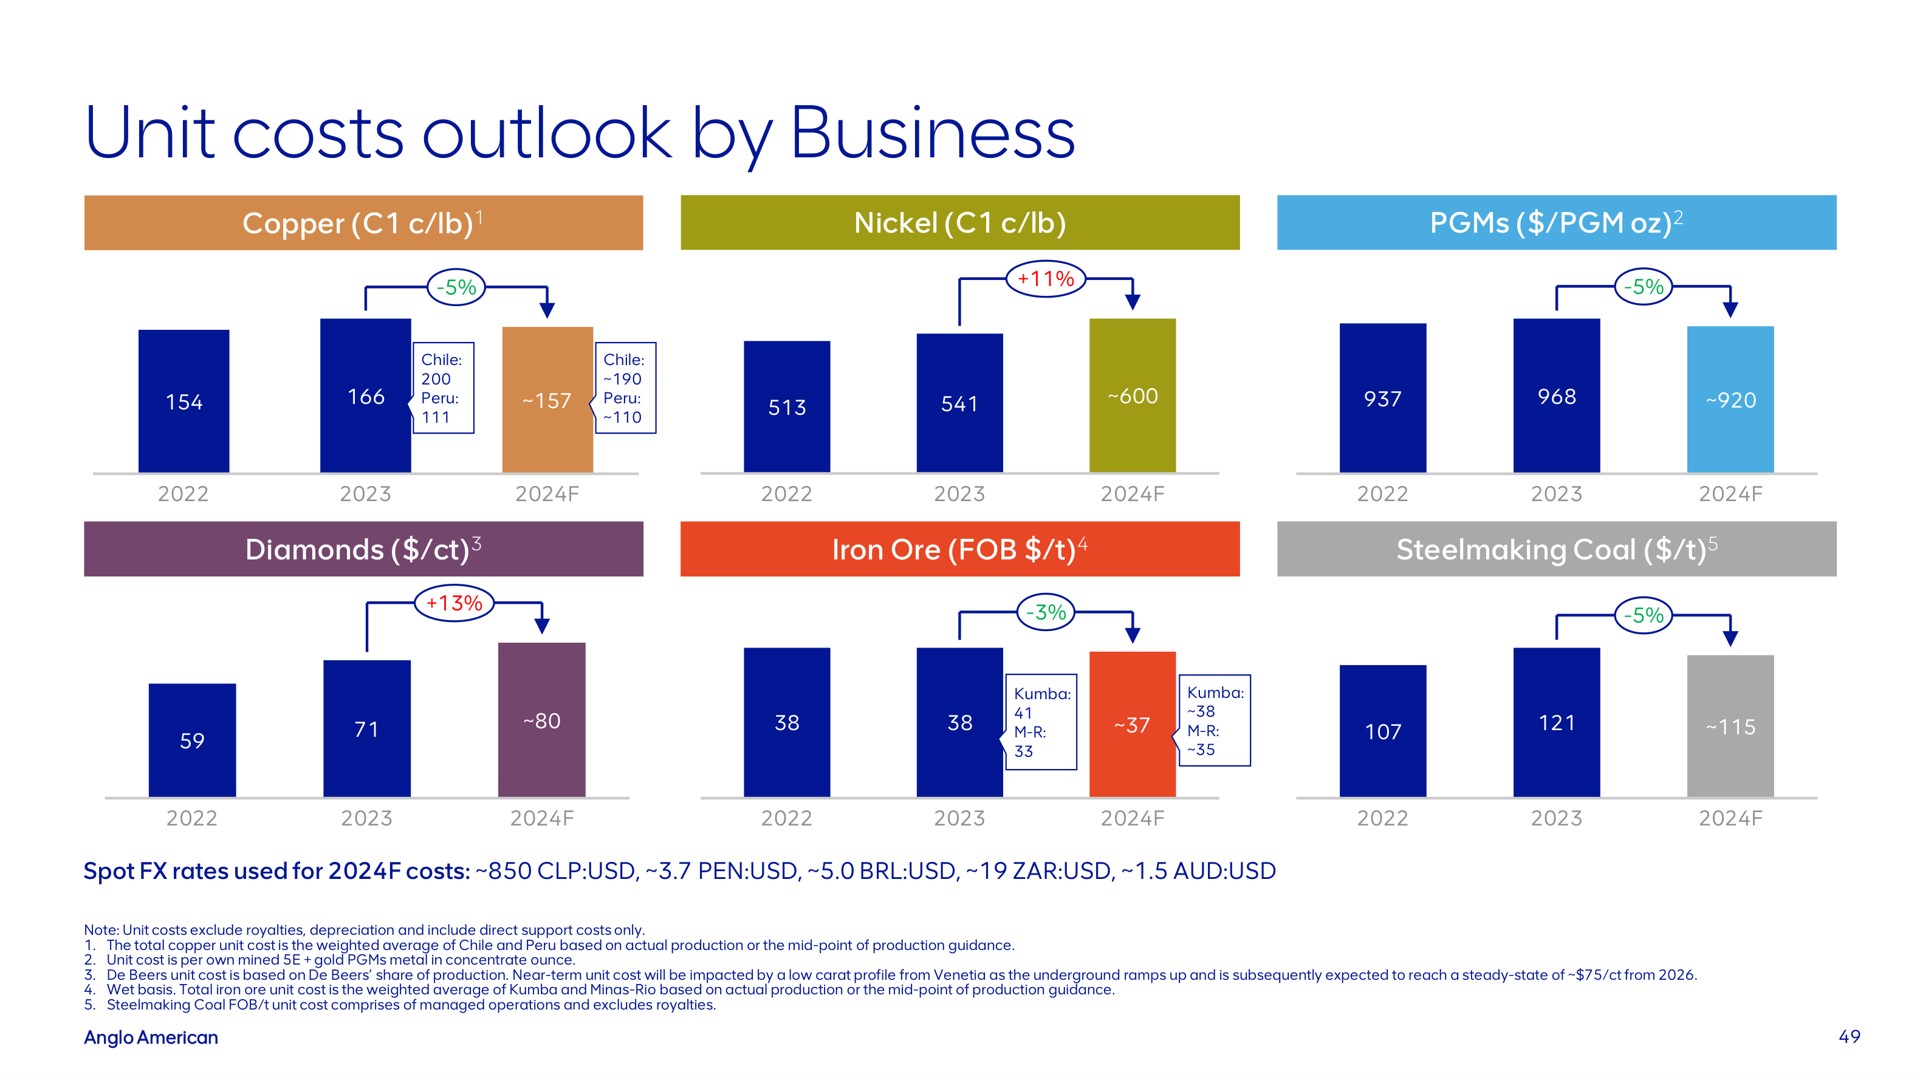 unit costs outlook by business | AngloAmerican